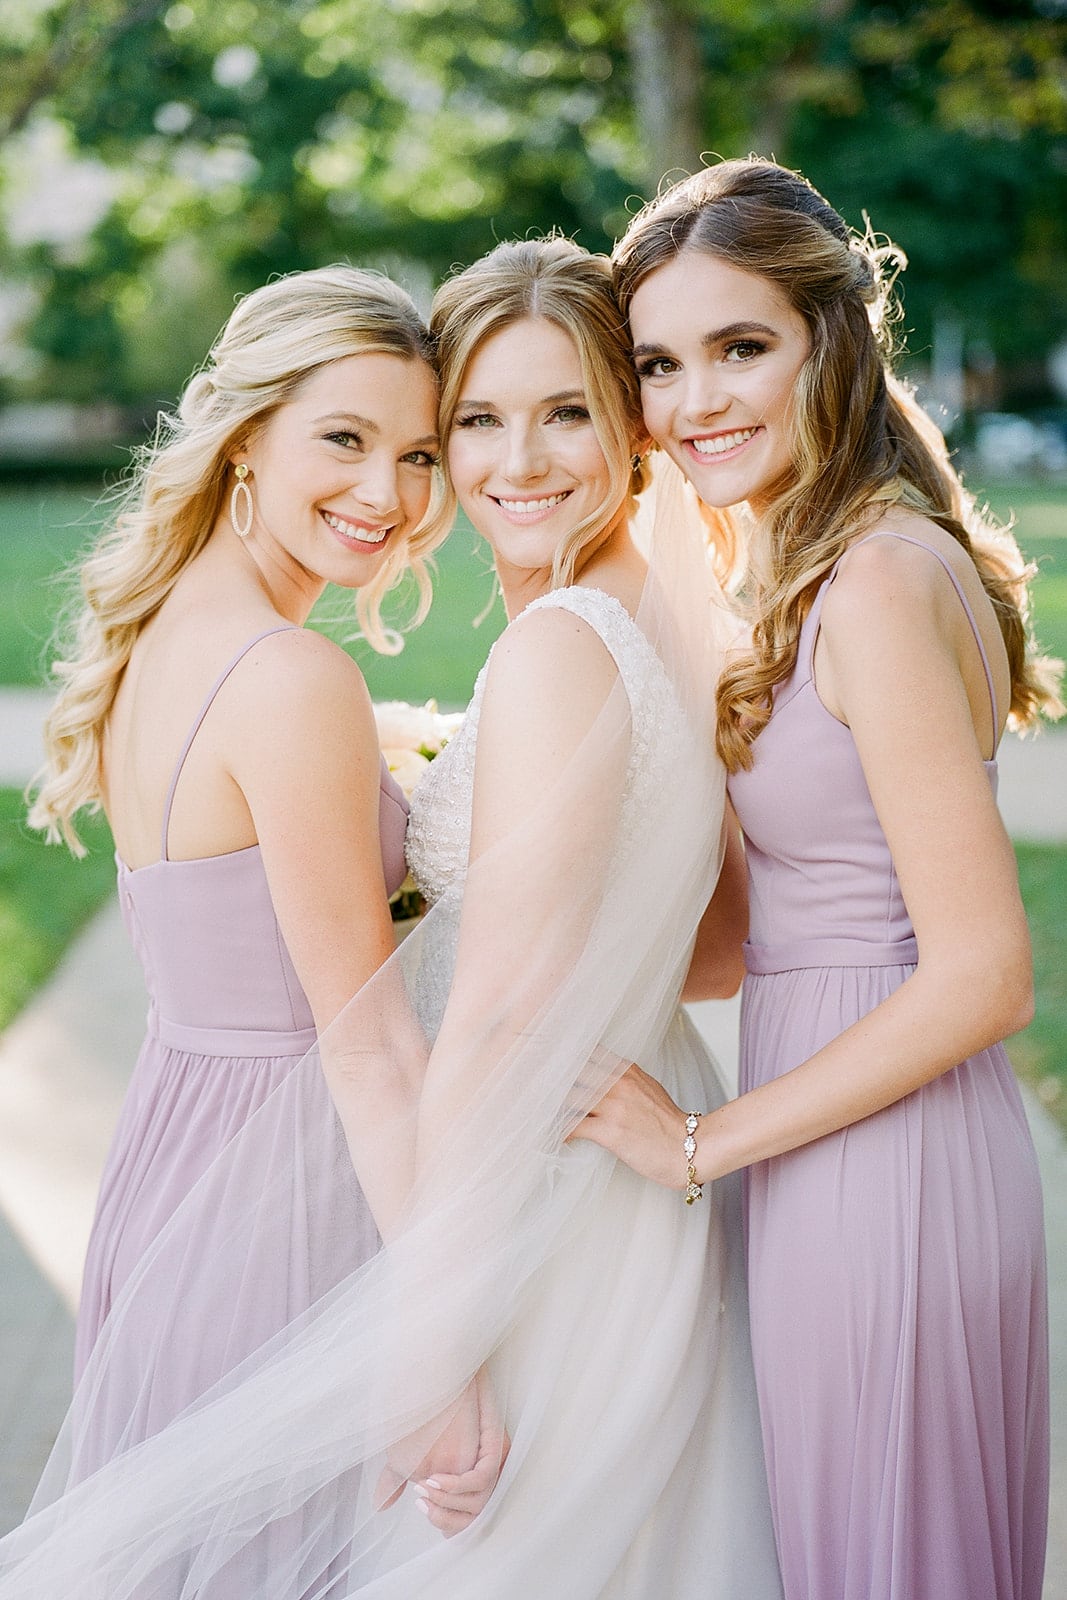 Sisters with the bride on her wedding day